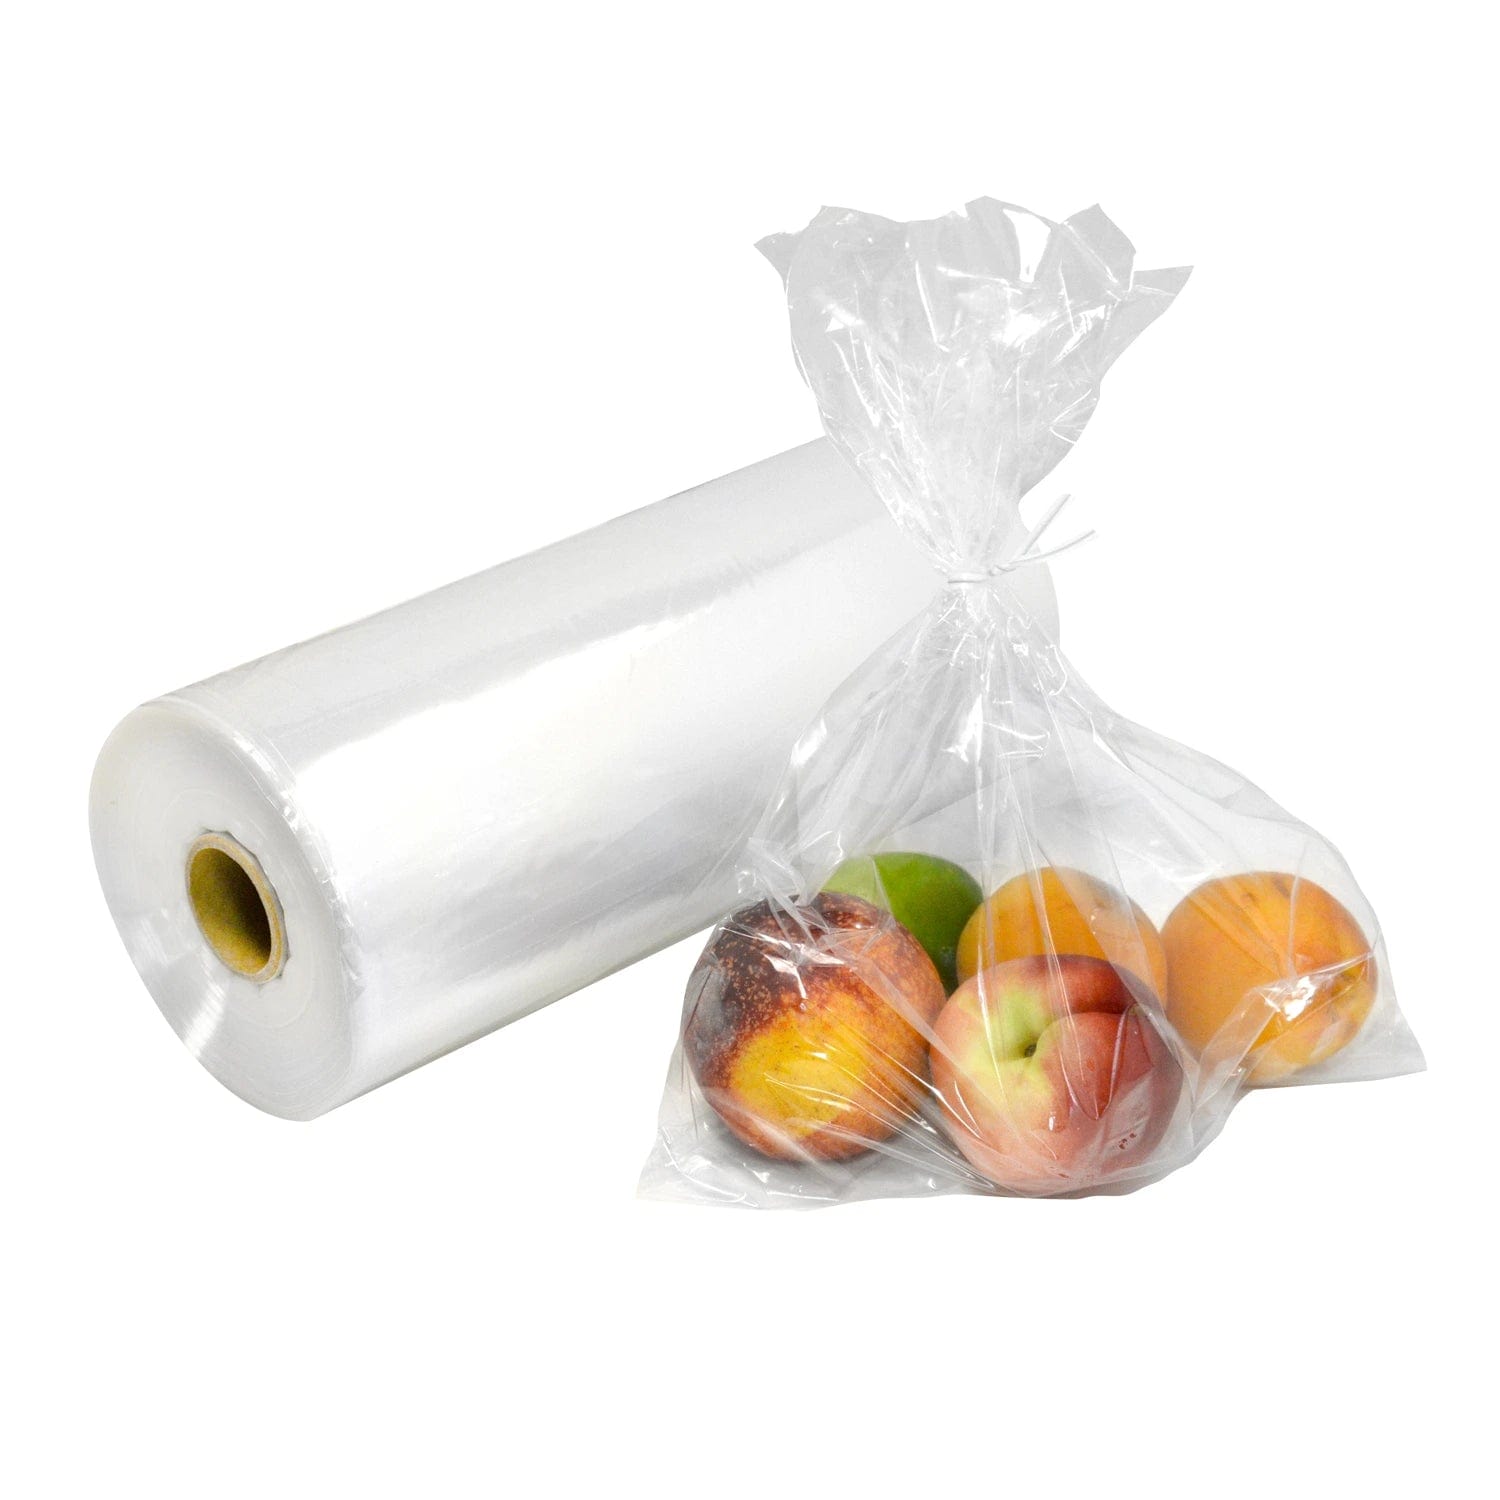 Efficiency Meets Freshness: Understanding the Role of Produce Rolls